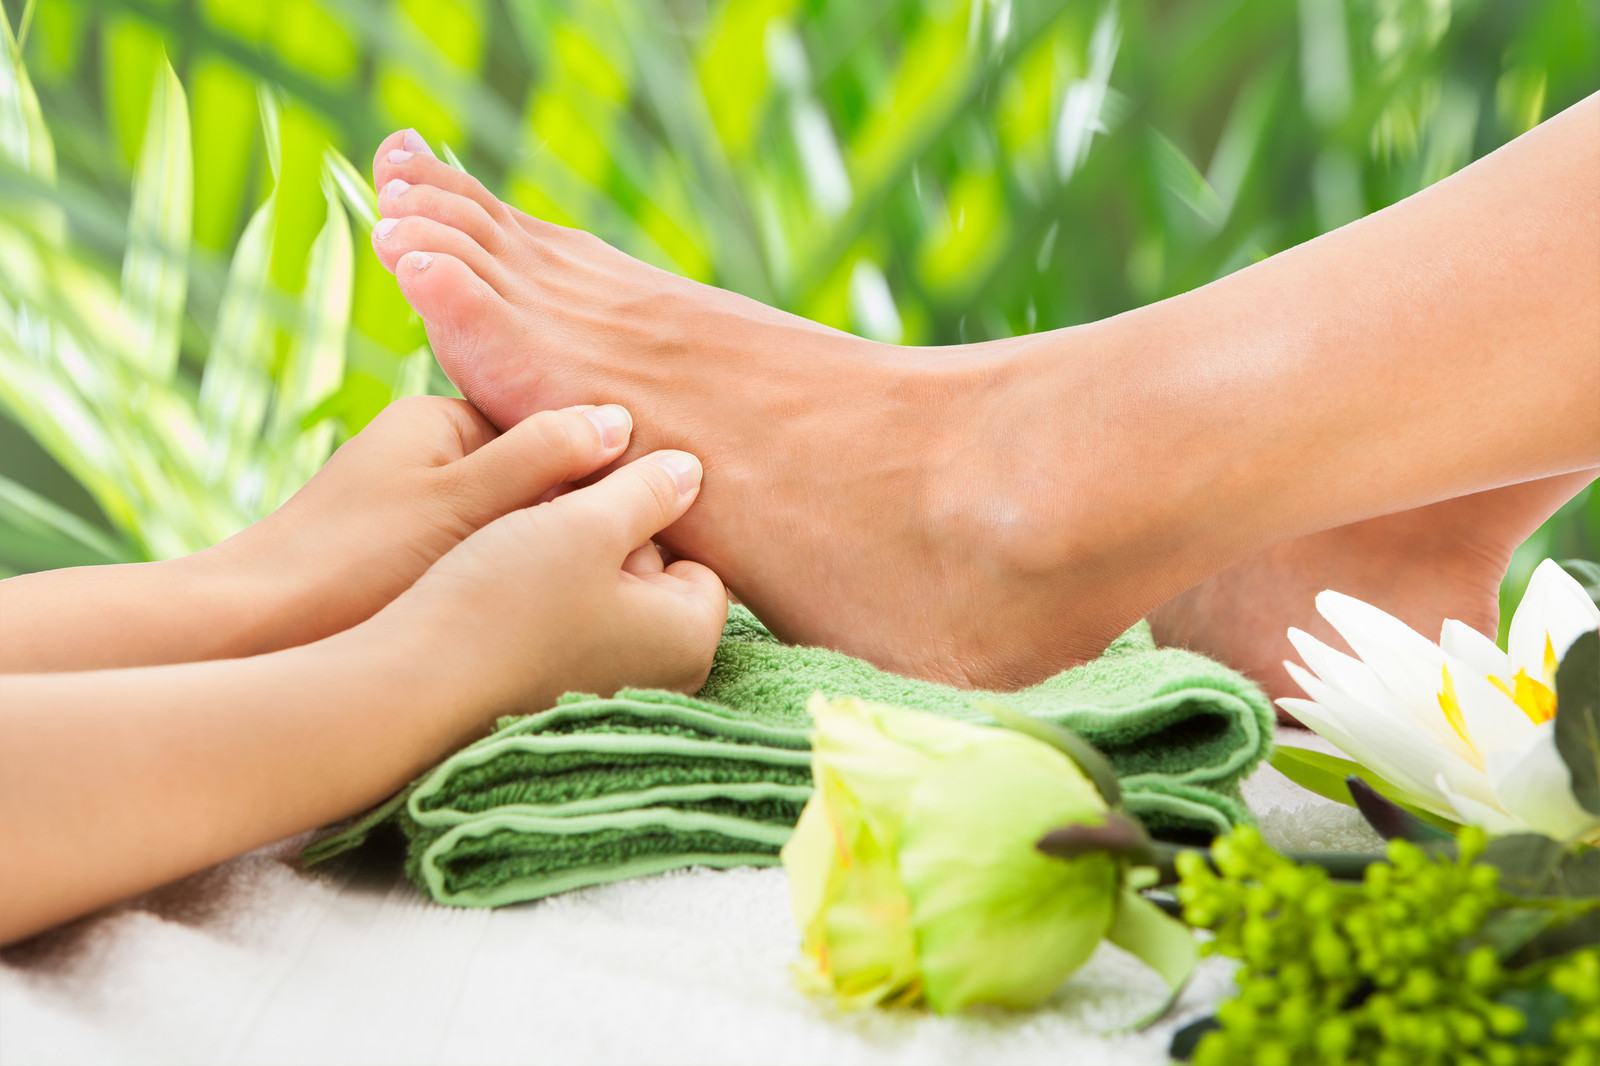 How To Find A Good Foot Massage Near Me